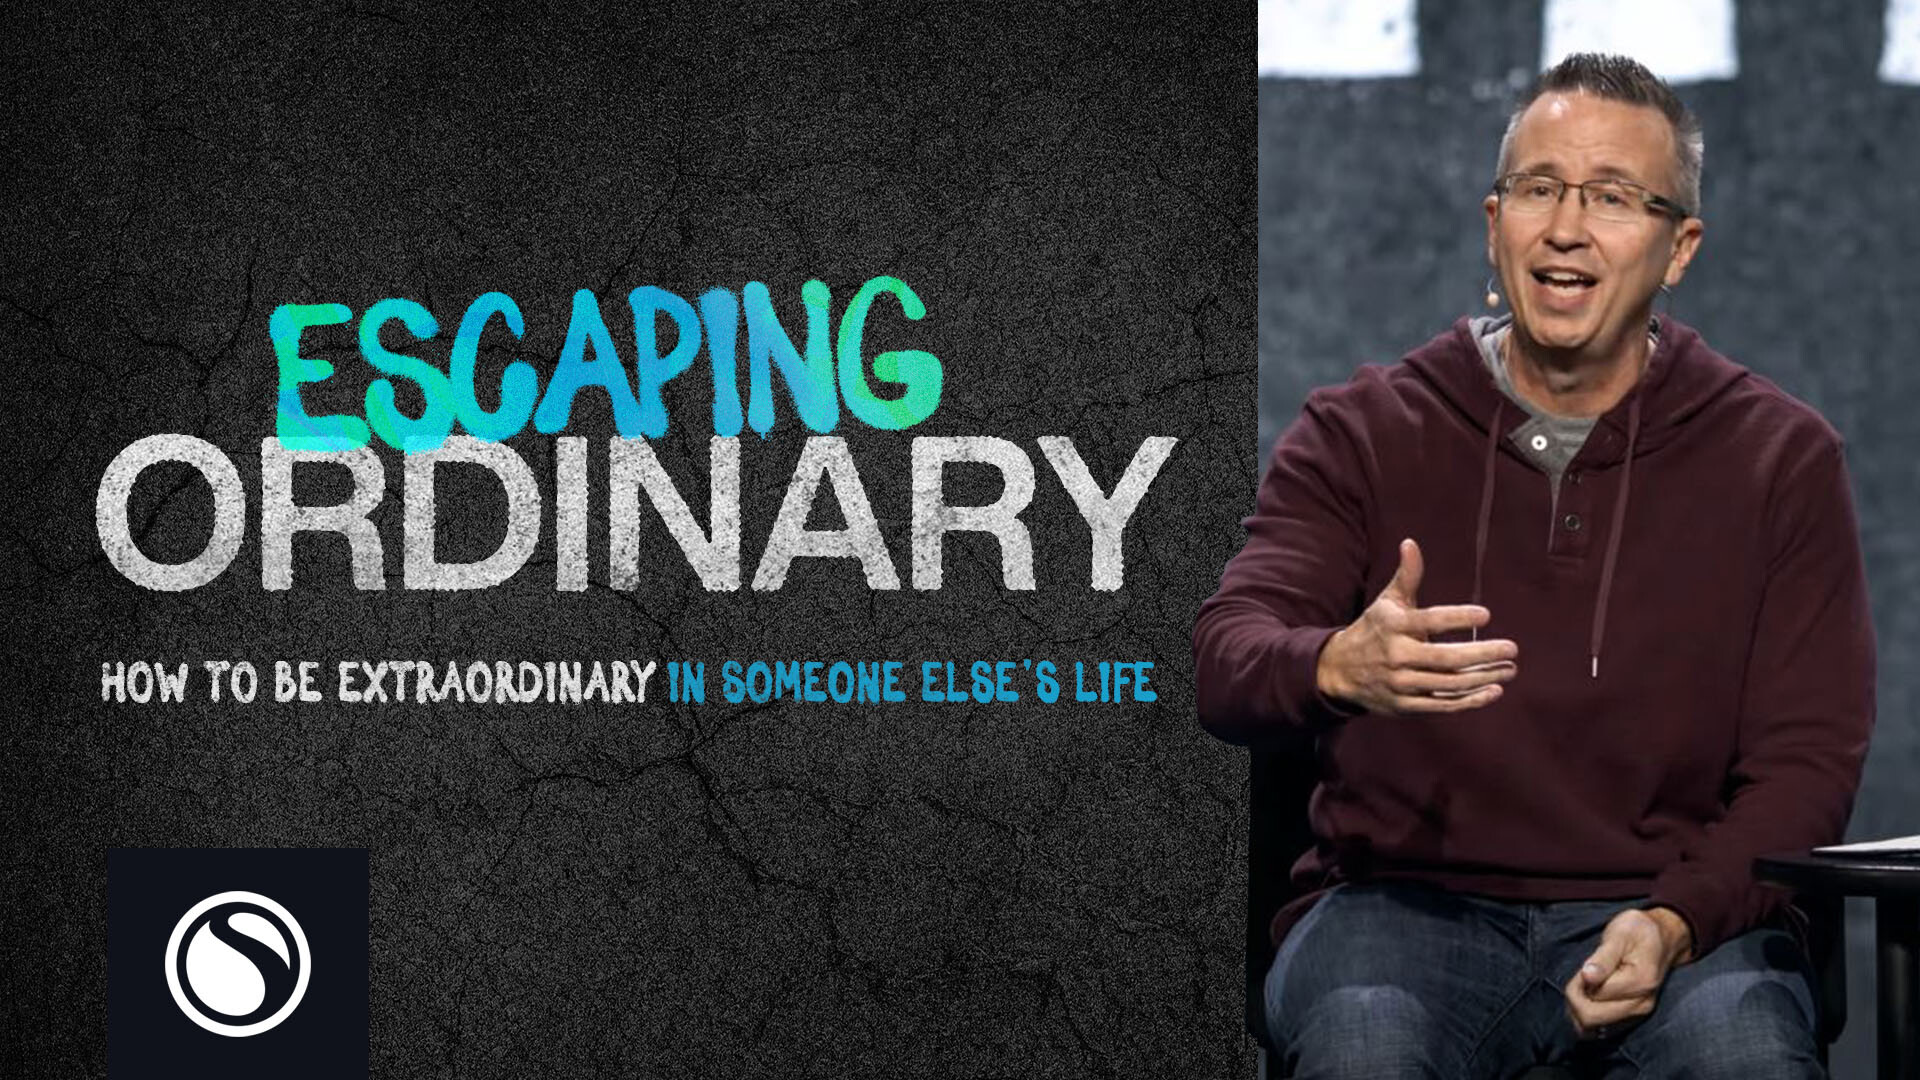 Watch Escaping Ordinary - How To Be Extraordinary In Someone Else's Life